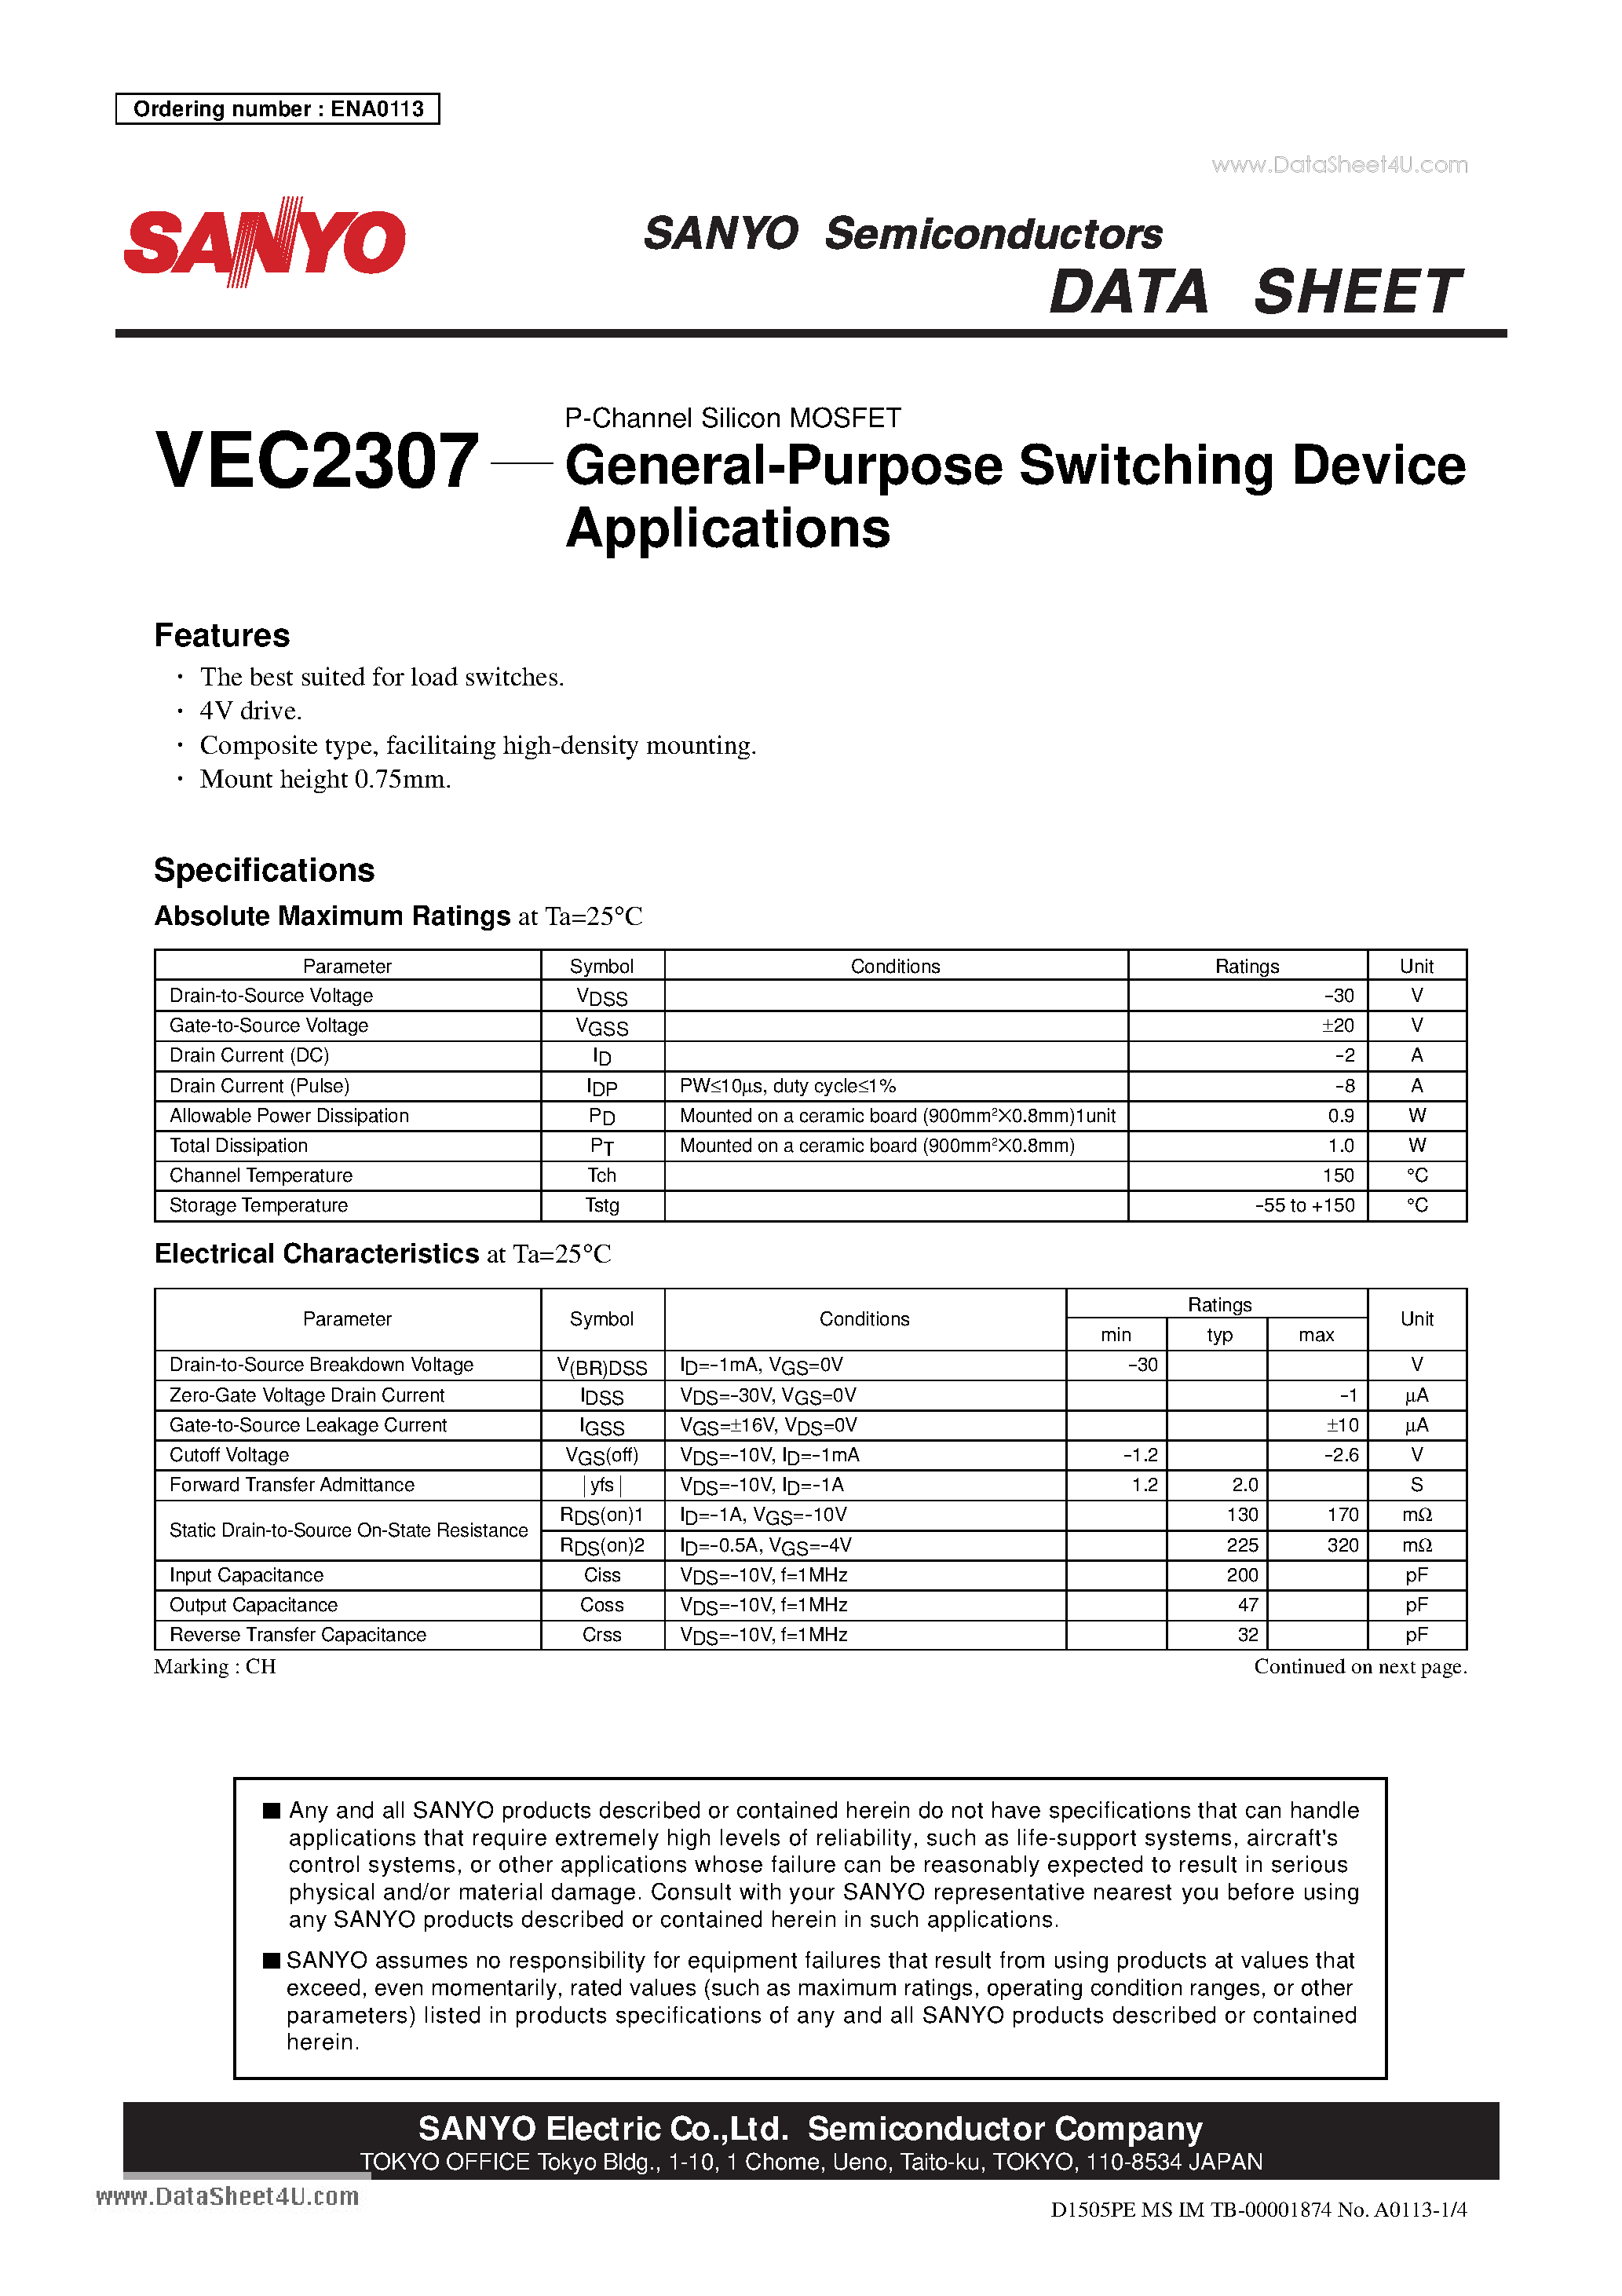 Даташит VEC2307 - P-Channel Silicon MOSFET General-Purpose Switching Device страница 1